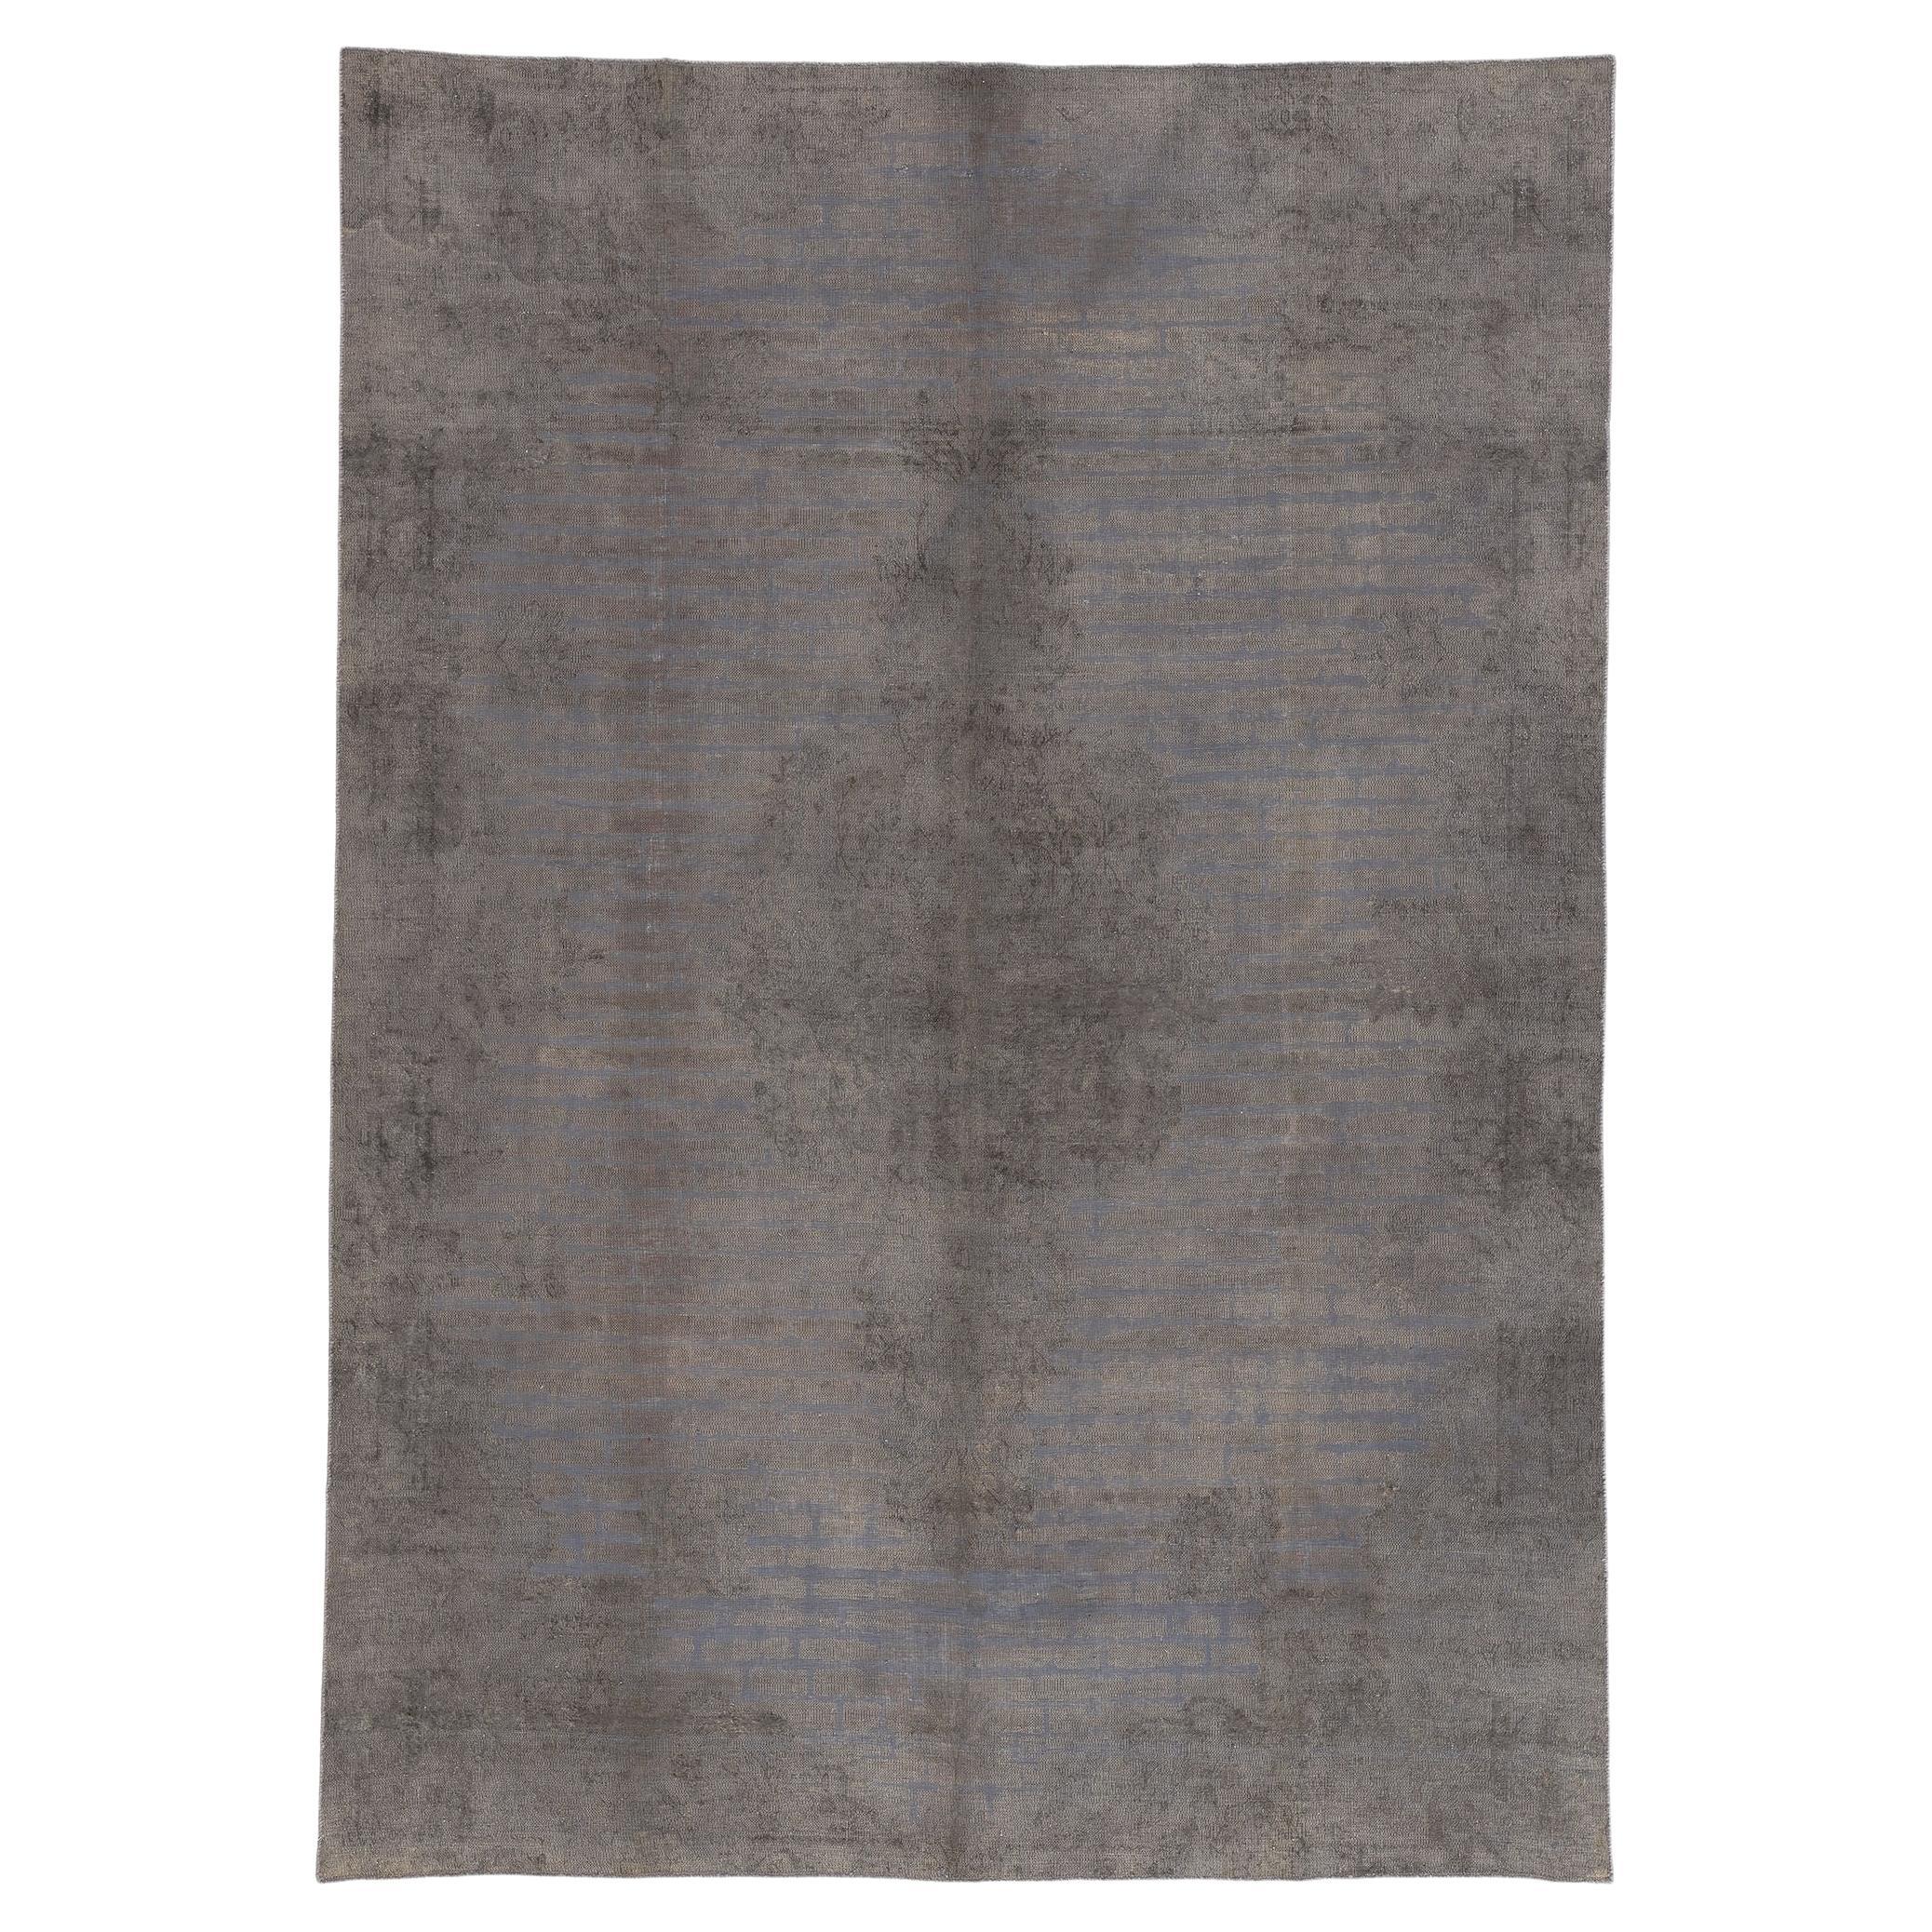 Vintage Turkish Overdyed Rug, French Industrial Meets Laid-Back Luxury For Sale